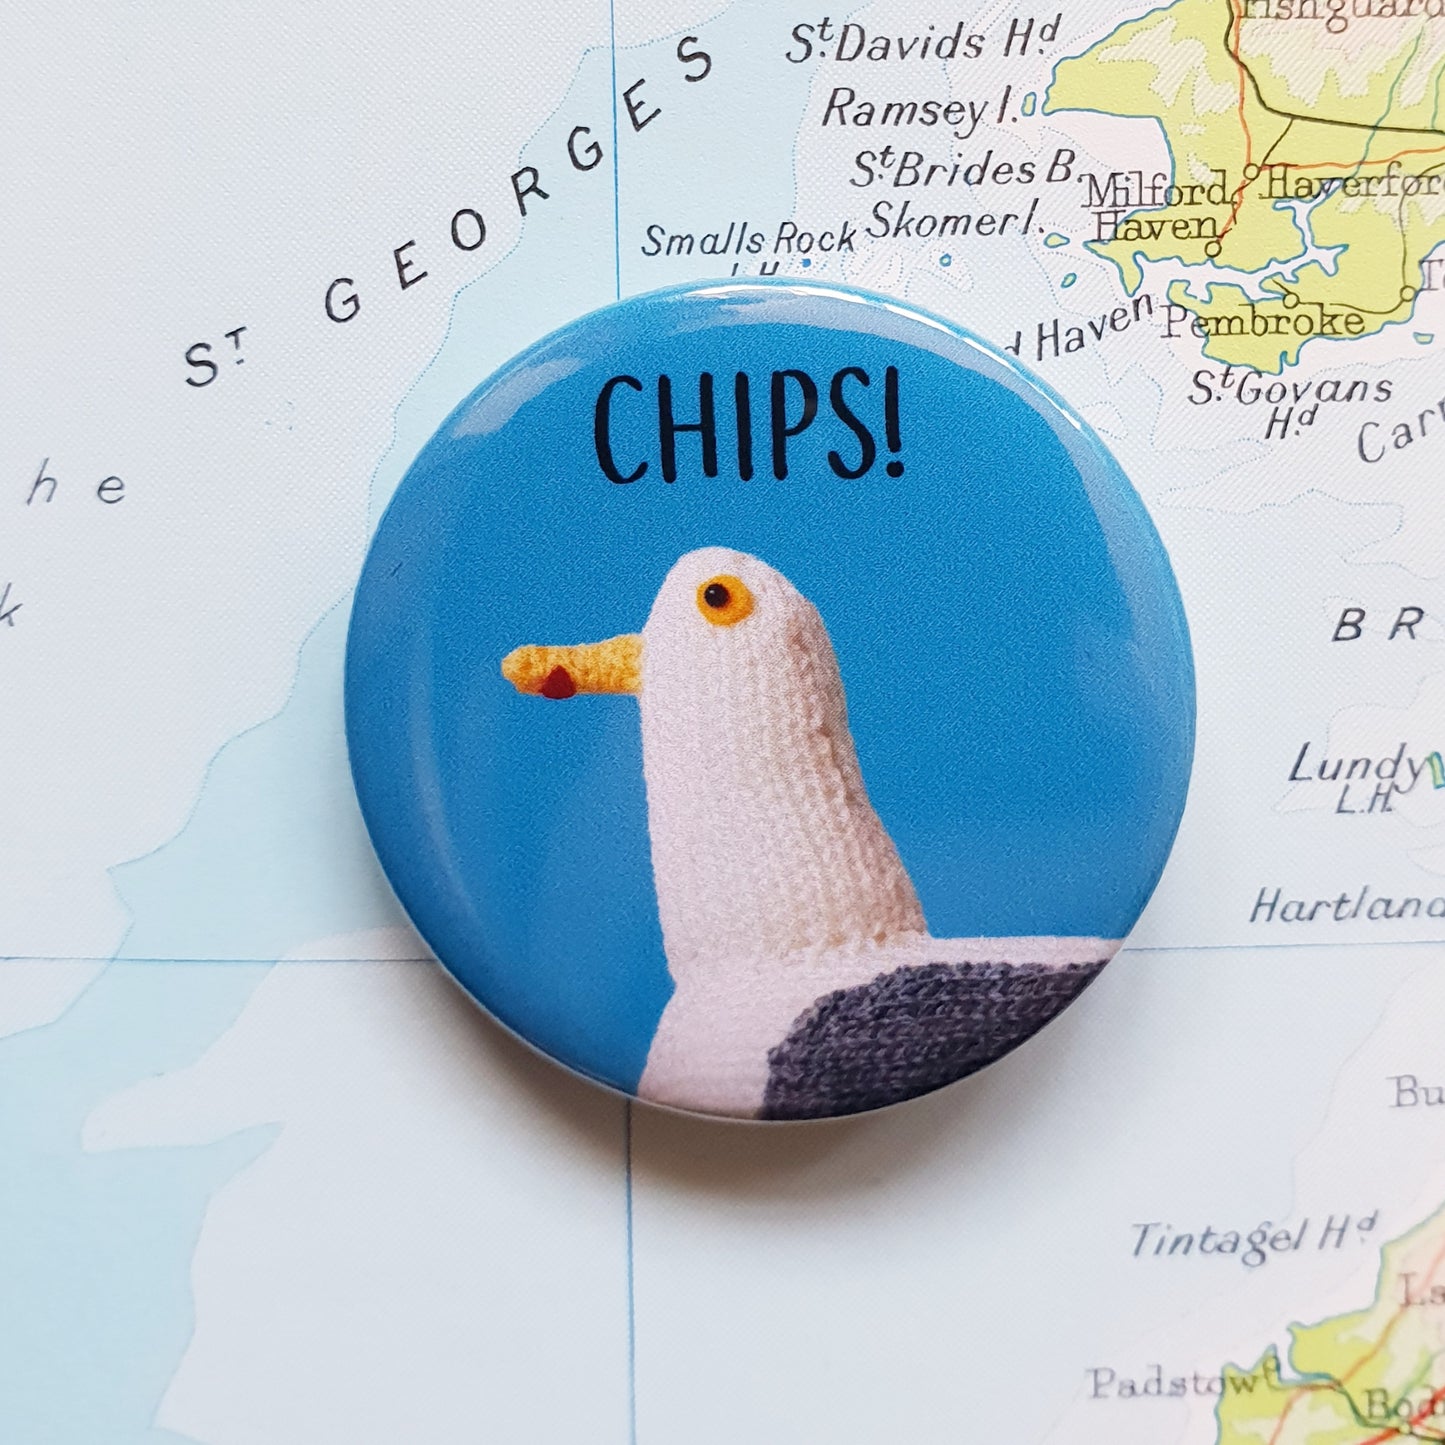 blue badge with CHIPS! written on it and a knitted seagull